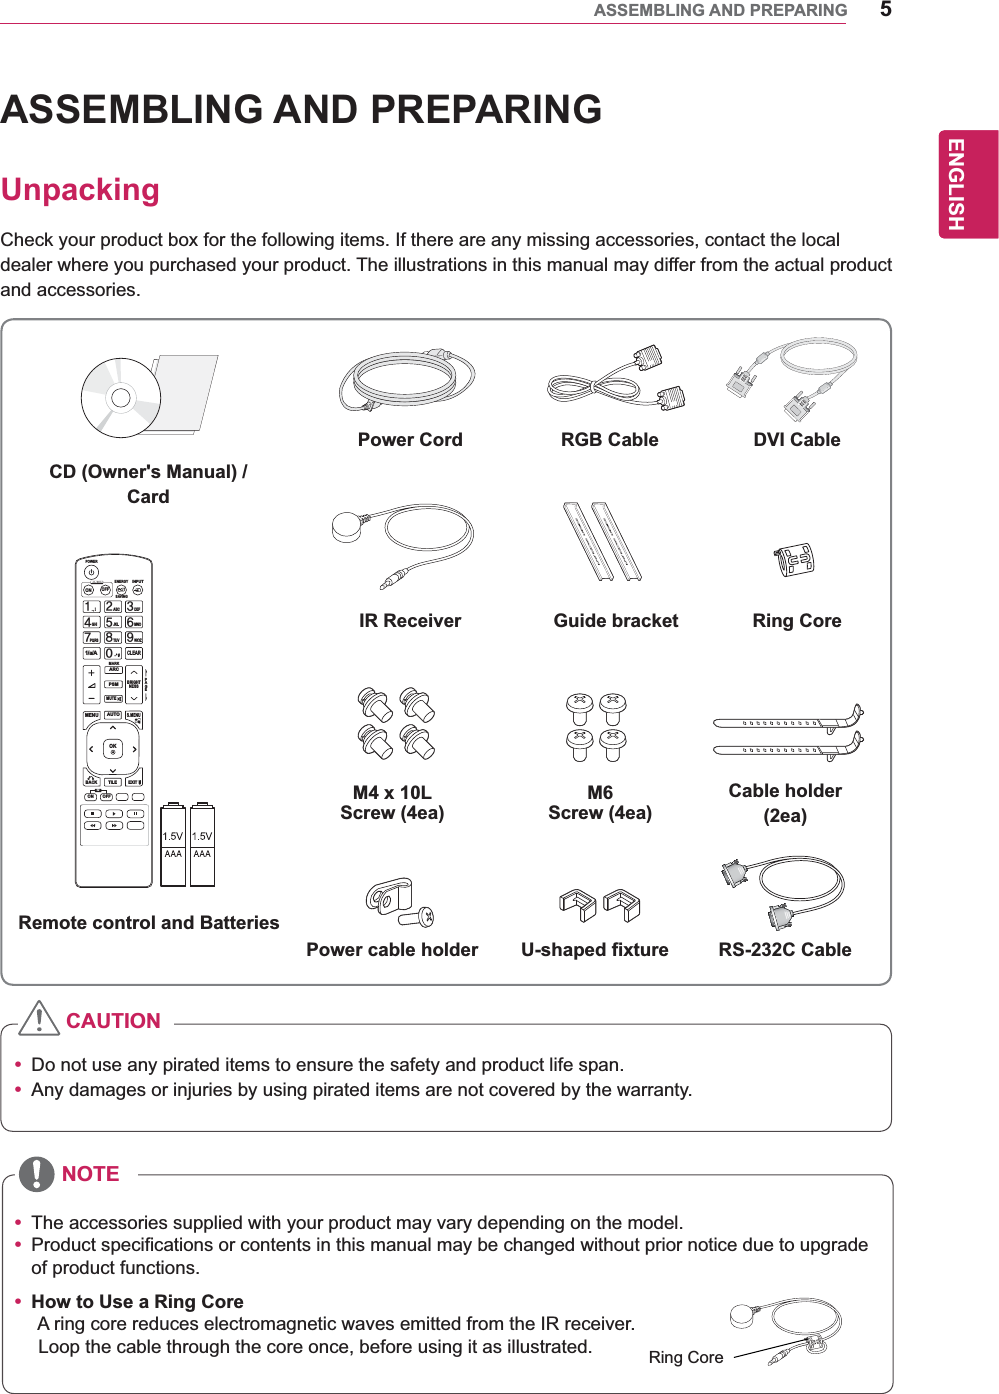 5ENGENGLISHASSEMBLING AND PREPARINGASSEMBLING AND PREPARINGUnpackingCheck your product box for the following items. If there are any missing accessories, contact the local dealer where you purchased your product. The illustrations in this manual may differ from the actual product and accessories.y Do not use any pirated items to ensure the safety and product life span.y Any damages or injuries by using pirated items are not covered by the warranty. y The accessories supplied with your product may vary depending on the model.y Product specifications or contents in this manual may be changed without prior notice due to upgrade of product functions.y How to Use a Ring Core       A ring core reduces electromagnetic waves emitted from the IR receiver.       Loop the cable through the core once, before using it as illustrated.CAUTIONNOTEPAGEINPUTENERGYSAVINGMARKARCONOFF. , !ABCDEFGHIJKLMNOPQRSTUV1/a/A- * #WXYZCLEARMONITORPSMAUTOMUTEBRIGHTNESSMENUPOWEROKS.MENUIDBACK TILEON OFFEXITRemote control and BatteriesPower Cord DVI CableIR Receiver Guide bracketM4 x 10L Screw (4ea)Power cable holder U-shaped fixture RS-232C CableM6 Screw (4ea)Ring CoreCable holder(2ea)CD (Owner&apos;s Manual) /CardRGB CableRing Core